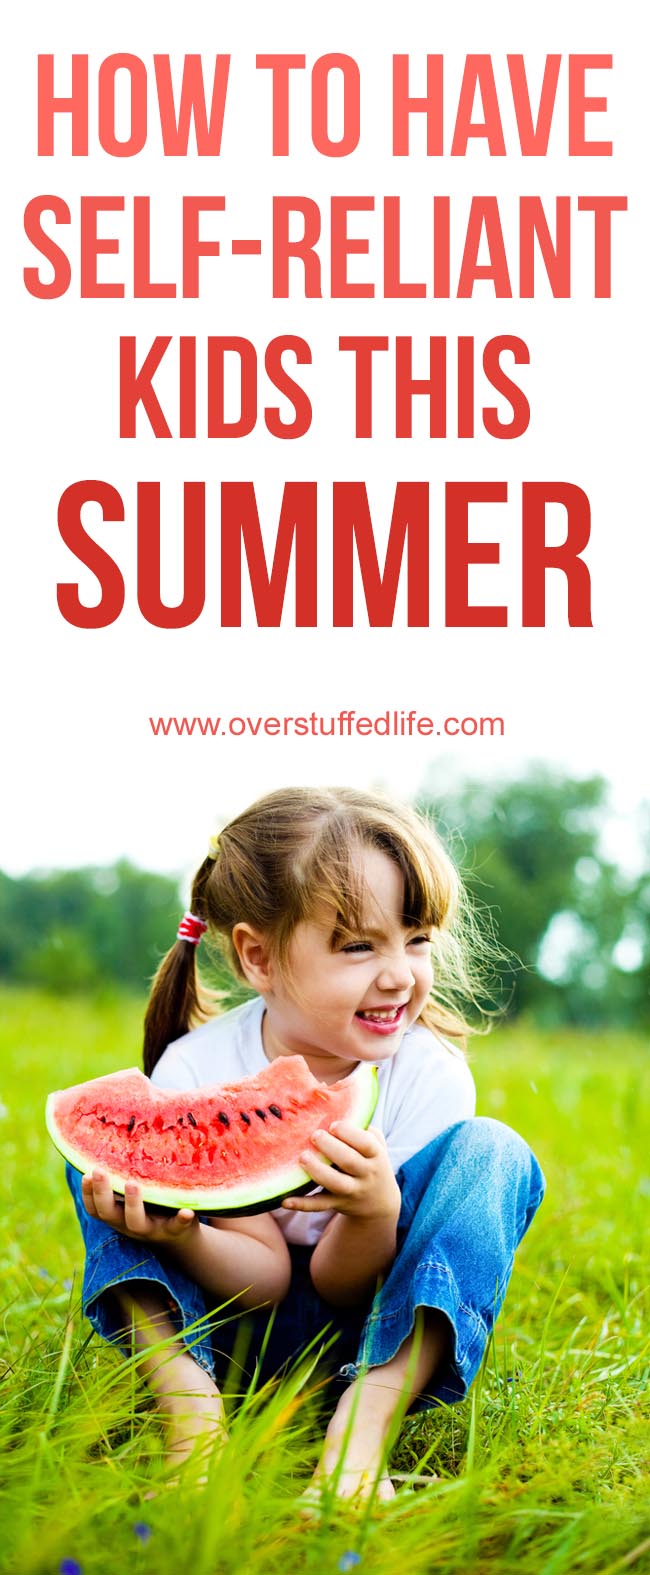 Summer activities for kids that will help encourage self-reliance and productivity